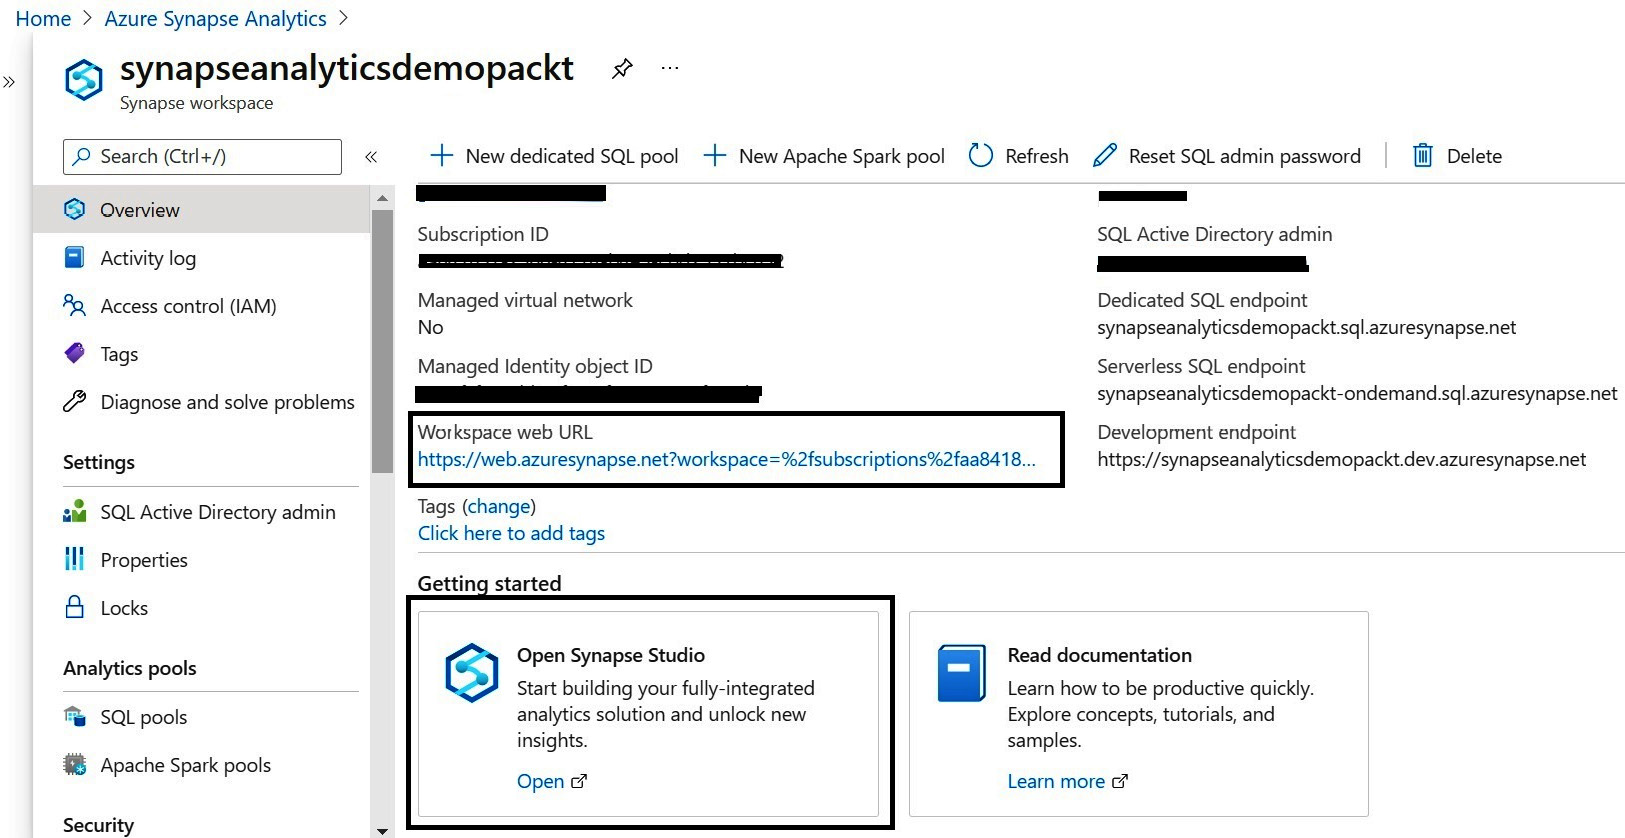 Figure 1.12 – A screenshot of a Synapse workspace in the Azure portal highlighting the links to access Synapse Studio